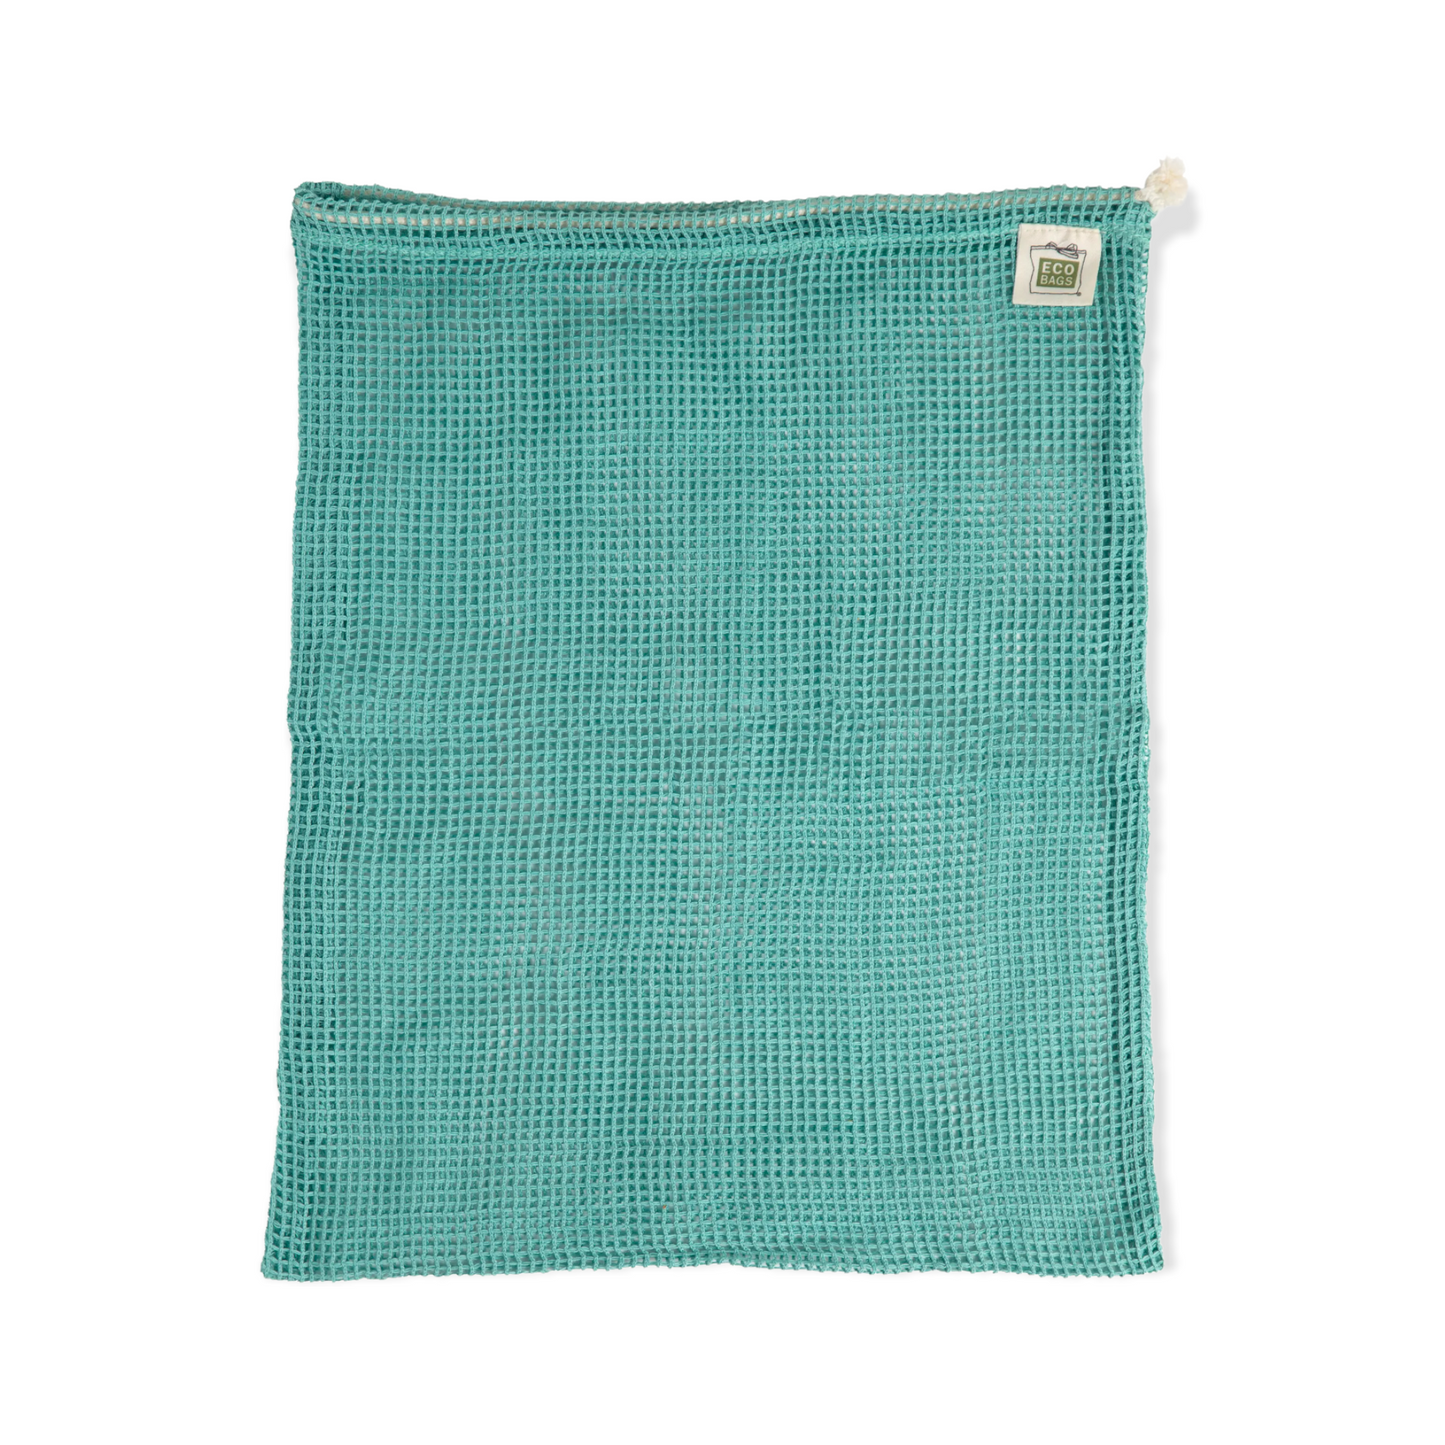 Produce Bags | Teal Cotton Mesh | EcoBags